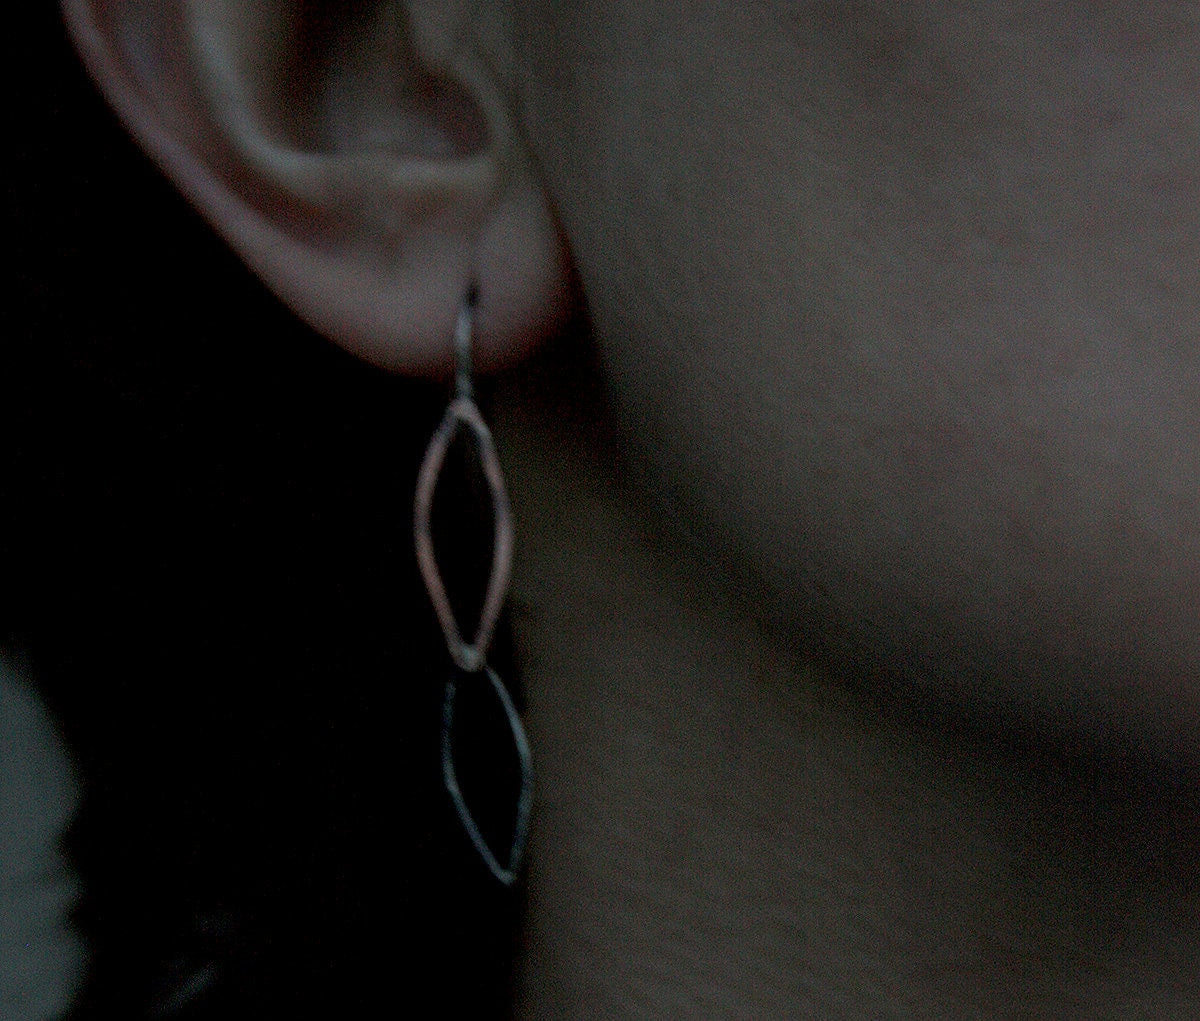 Symbiosis - sterling silver and copper earrings